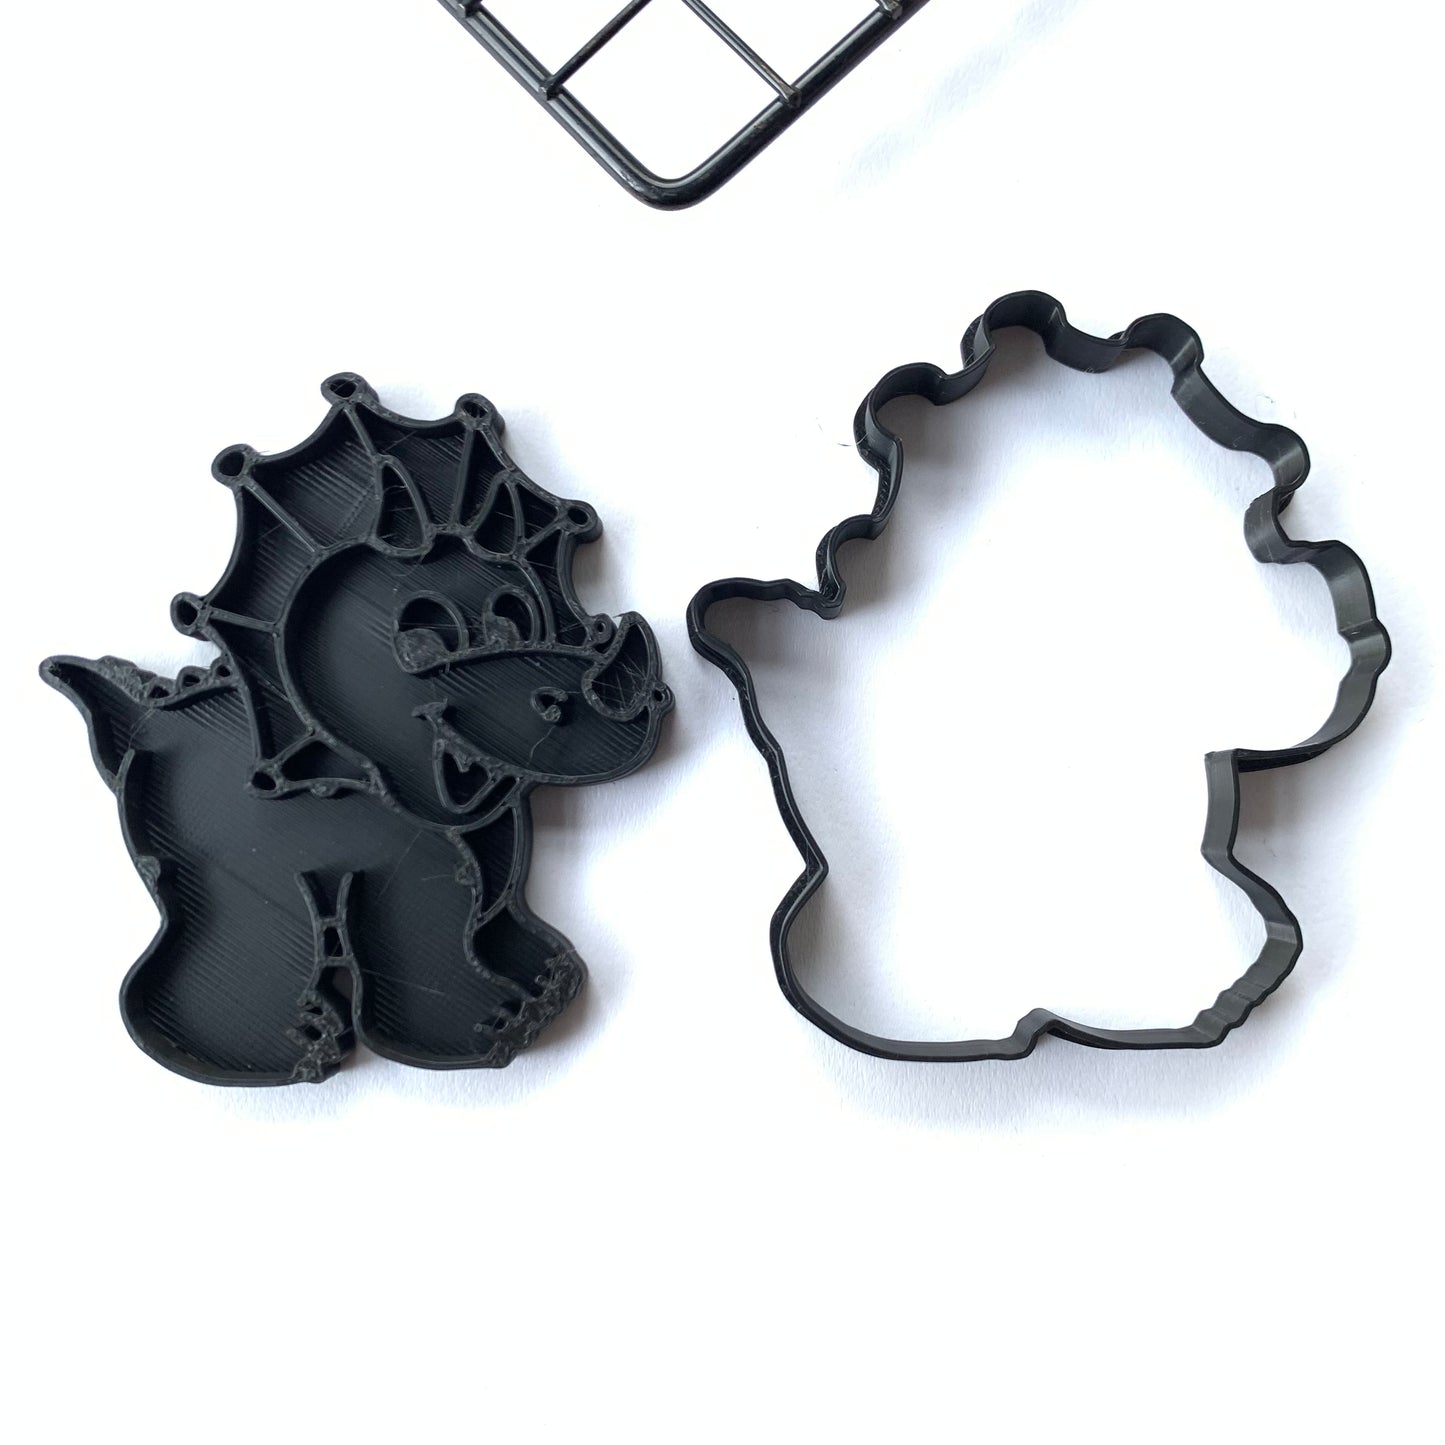 Dinosaur 3 - Paint Your Own - Cookie cutter + Stamp